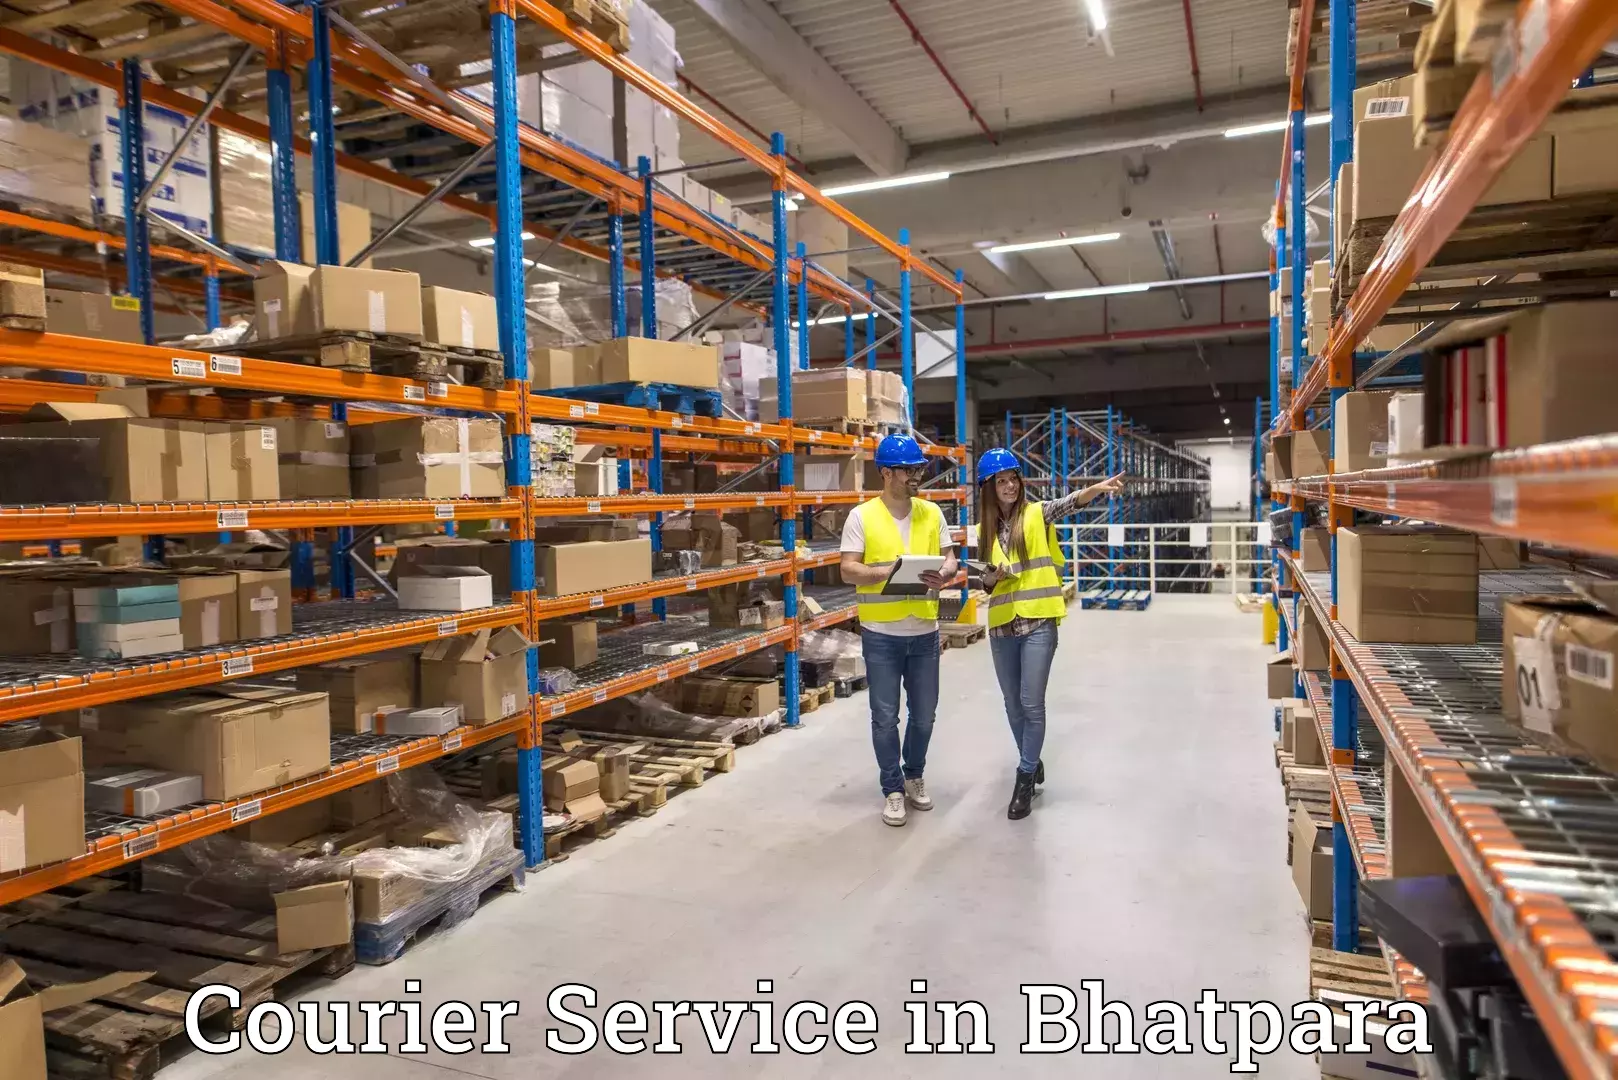 Courier service efficiency in Bhatpara